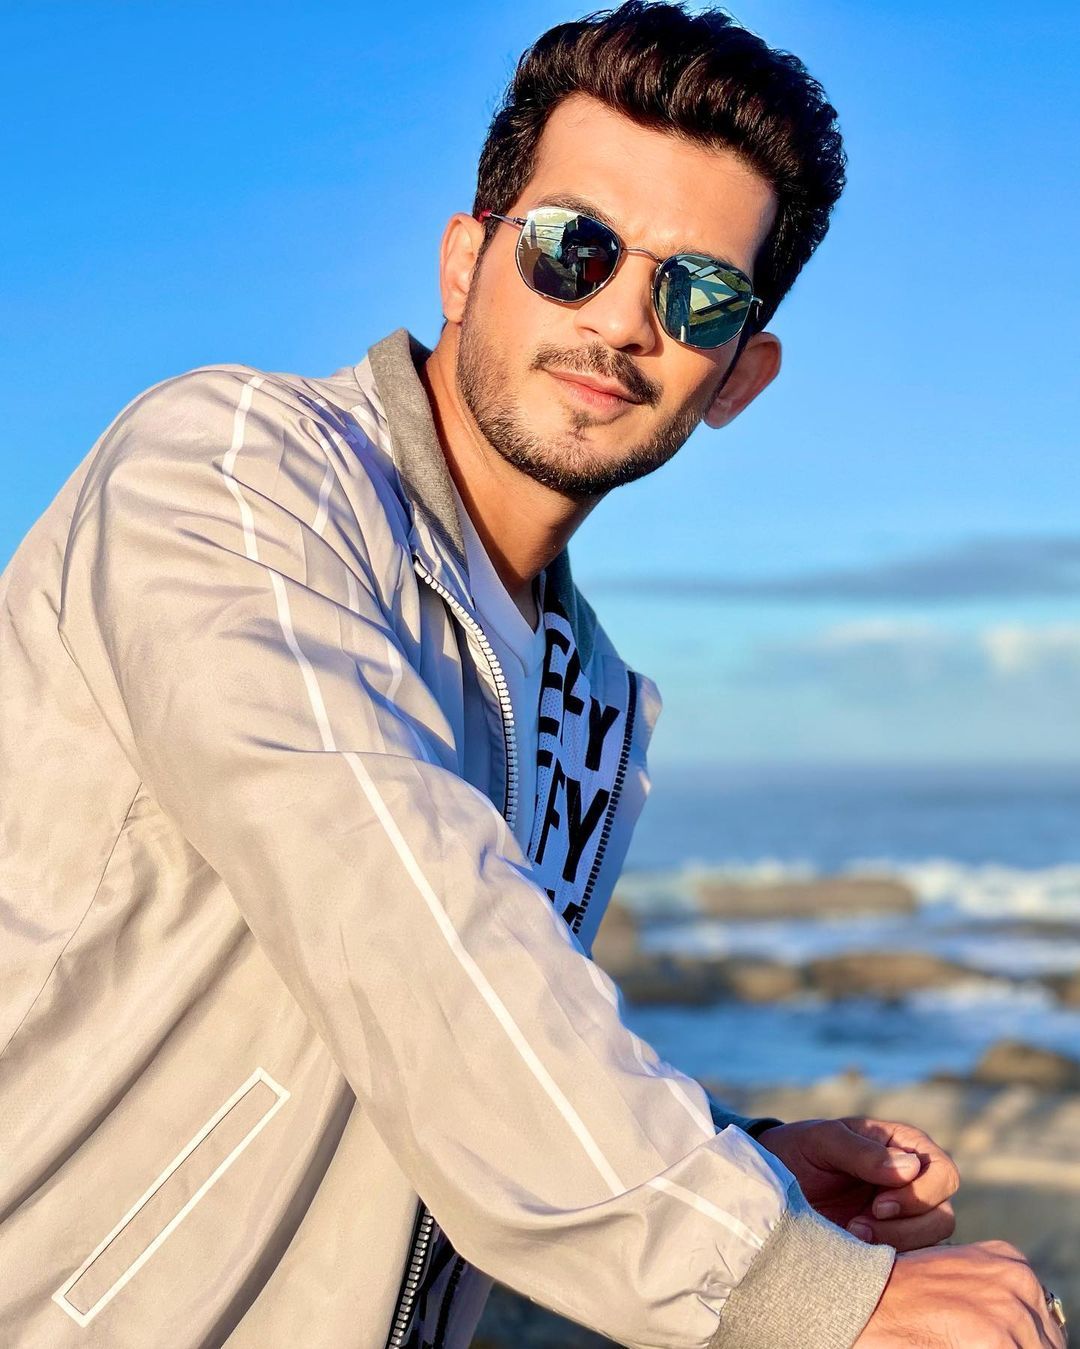 Arjun Bijlani confirms he has been approached for Bigg Boss 15, yet to make up his mind about participating